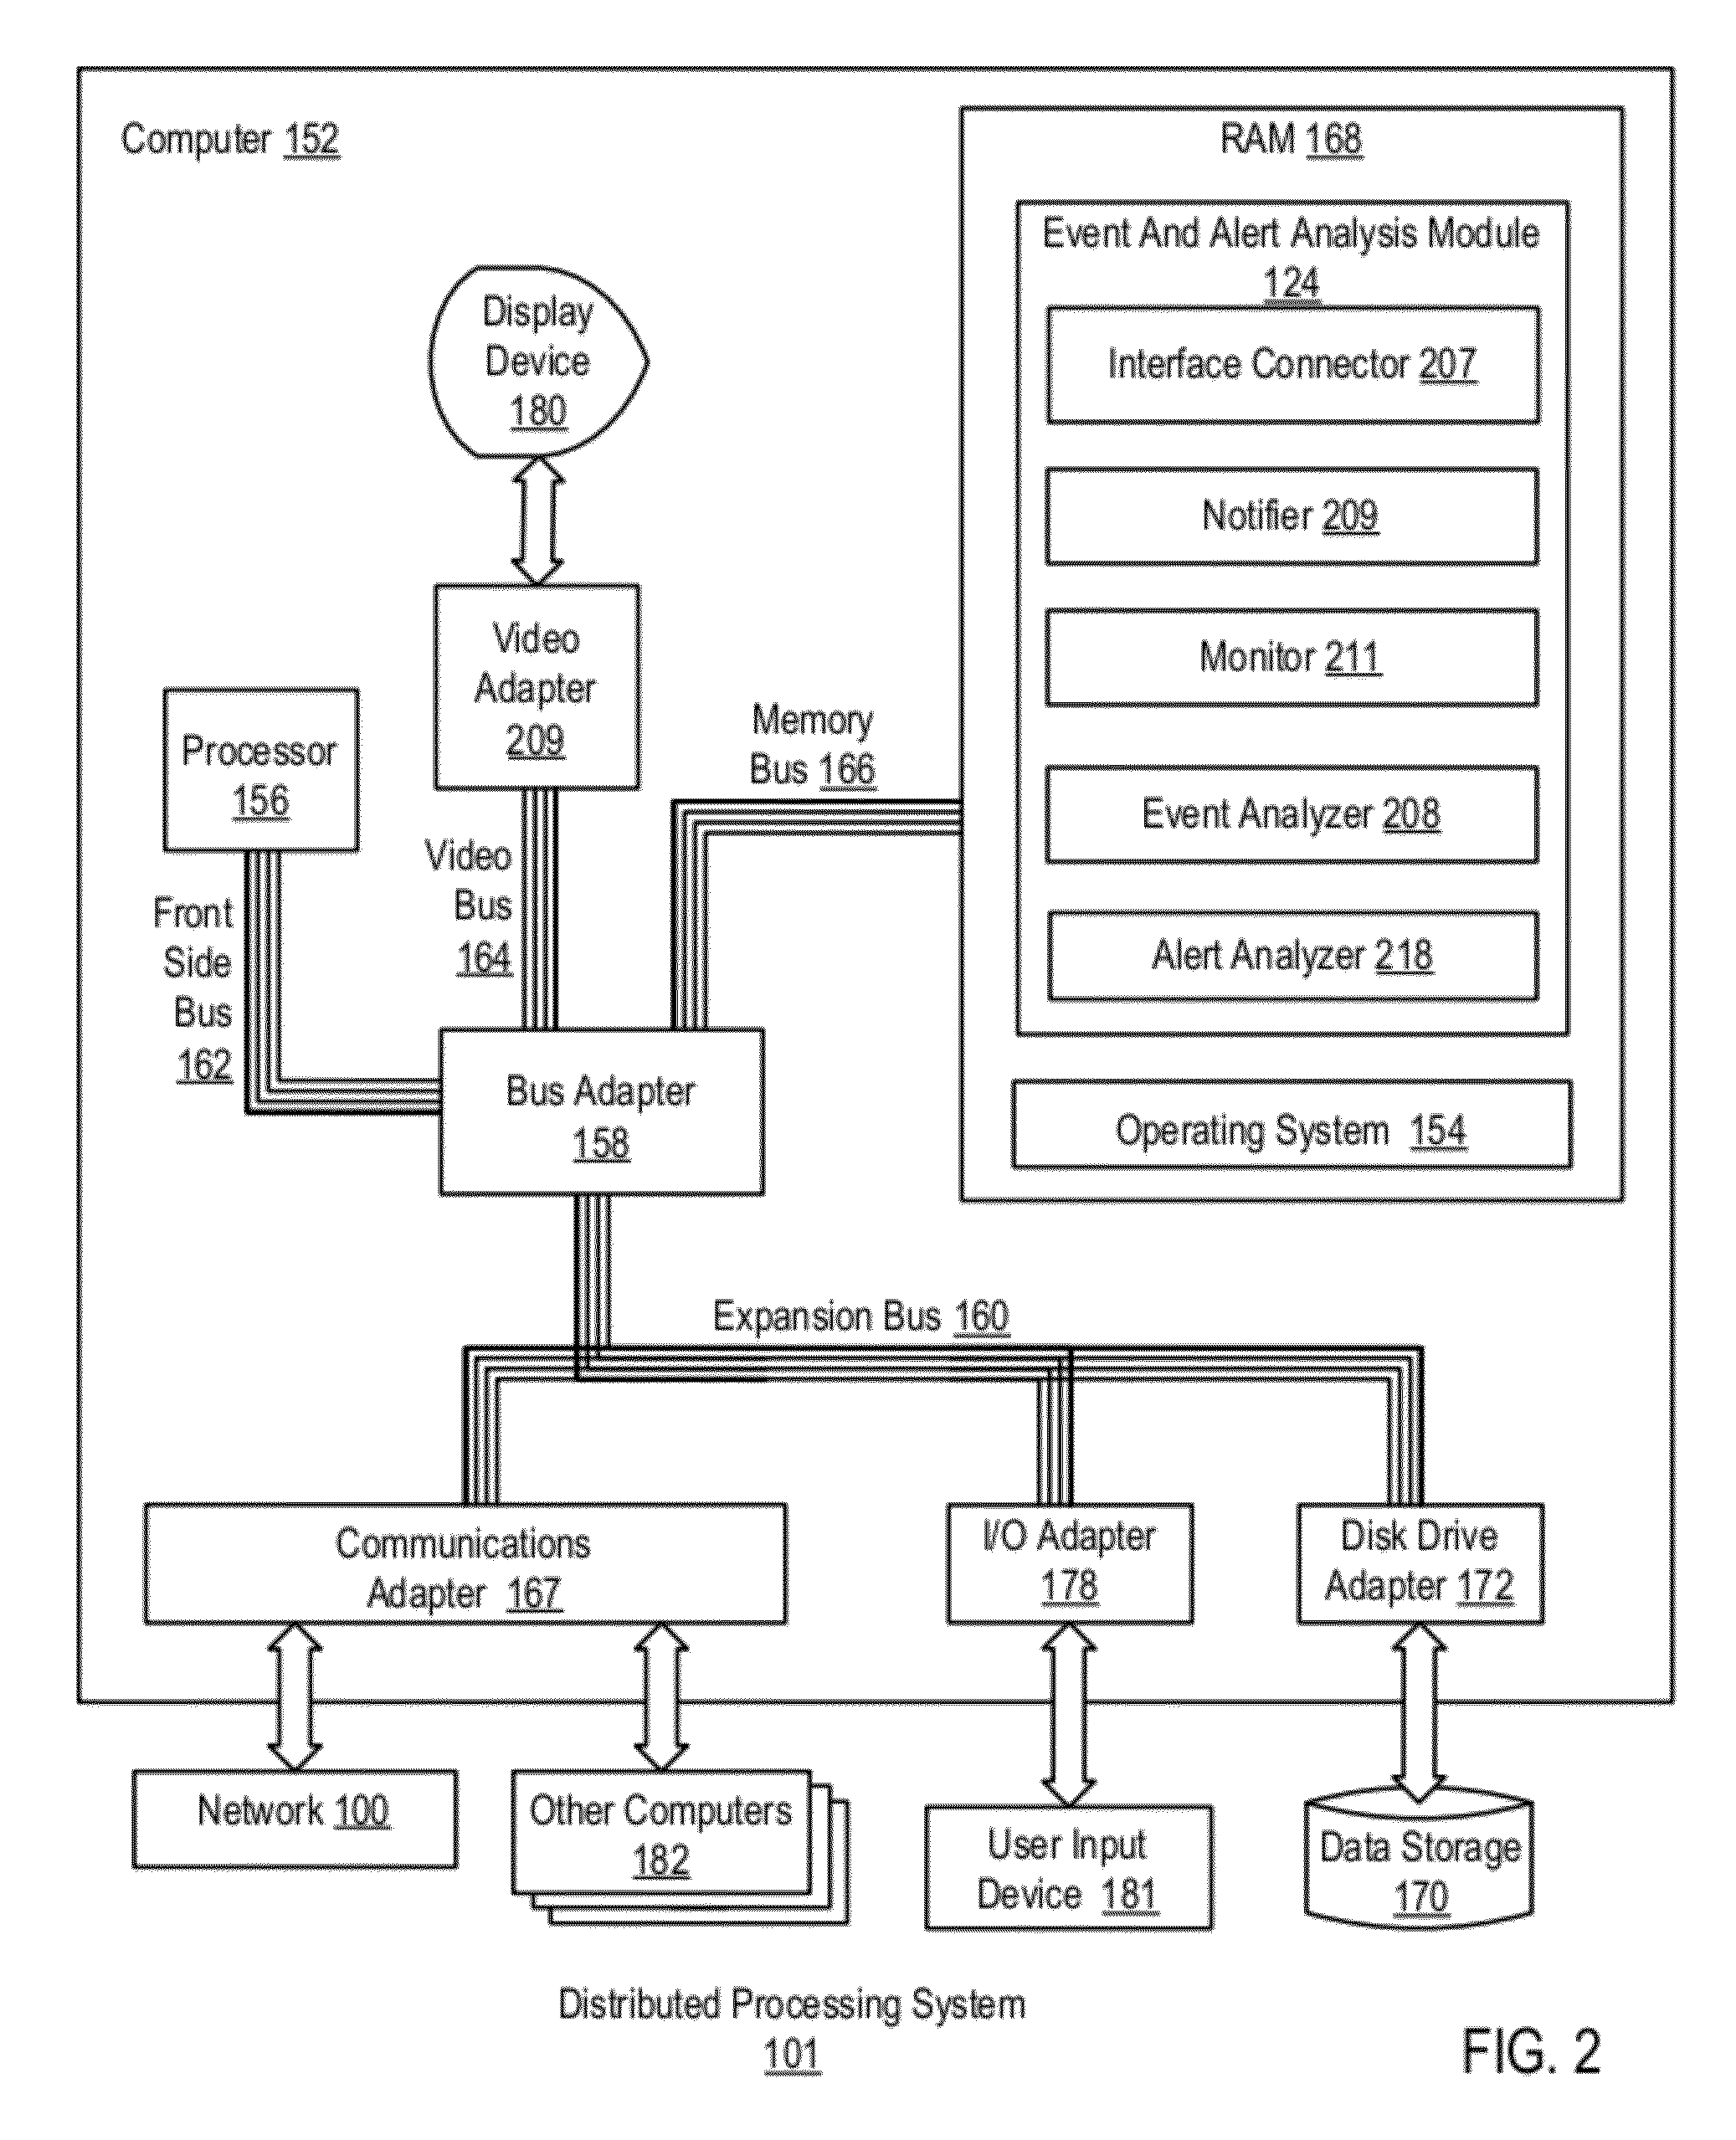 Flexible Event Data Content Management For Relevant Event And Alert Analysis Within A Distributed Processing System